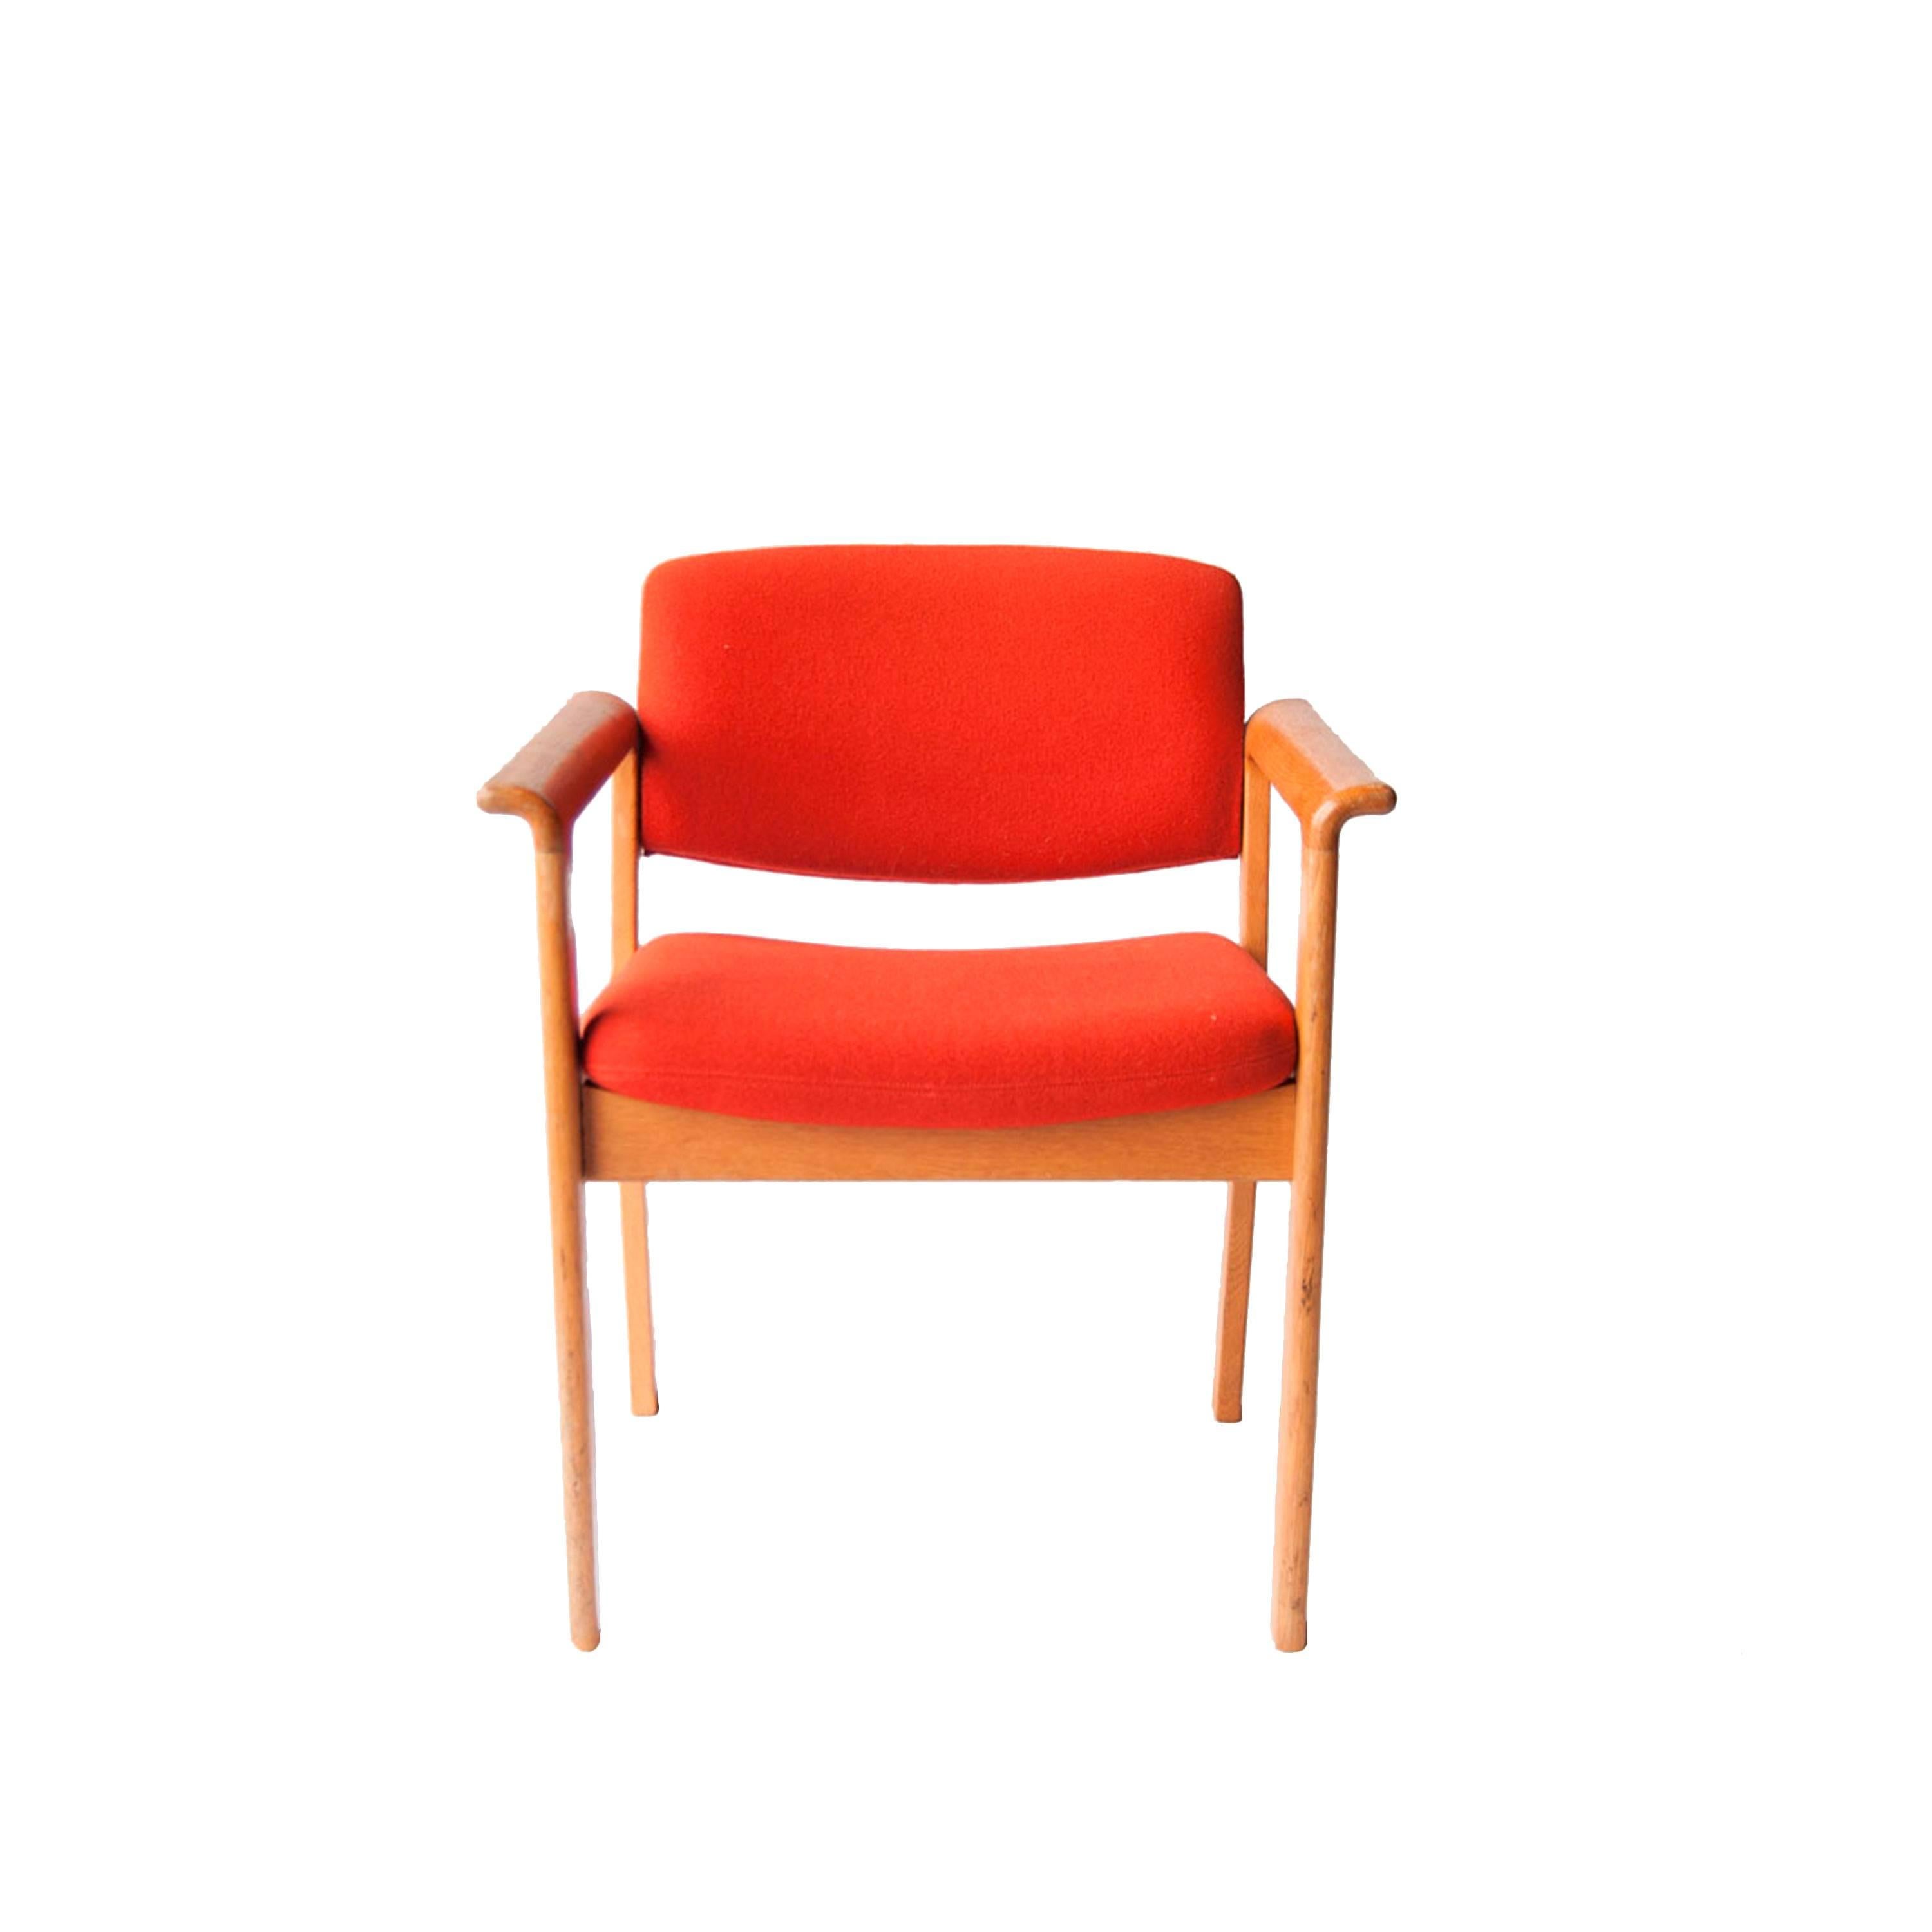 Armchair edited by Hong Stole with structure made of teak, seat and back upholstered in red.